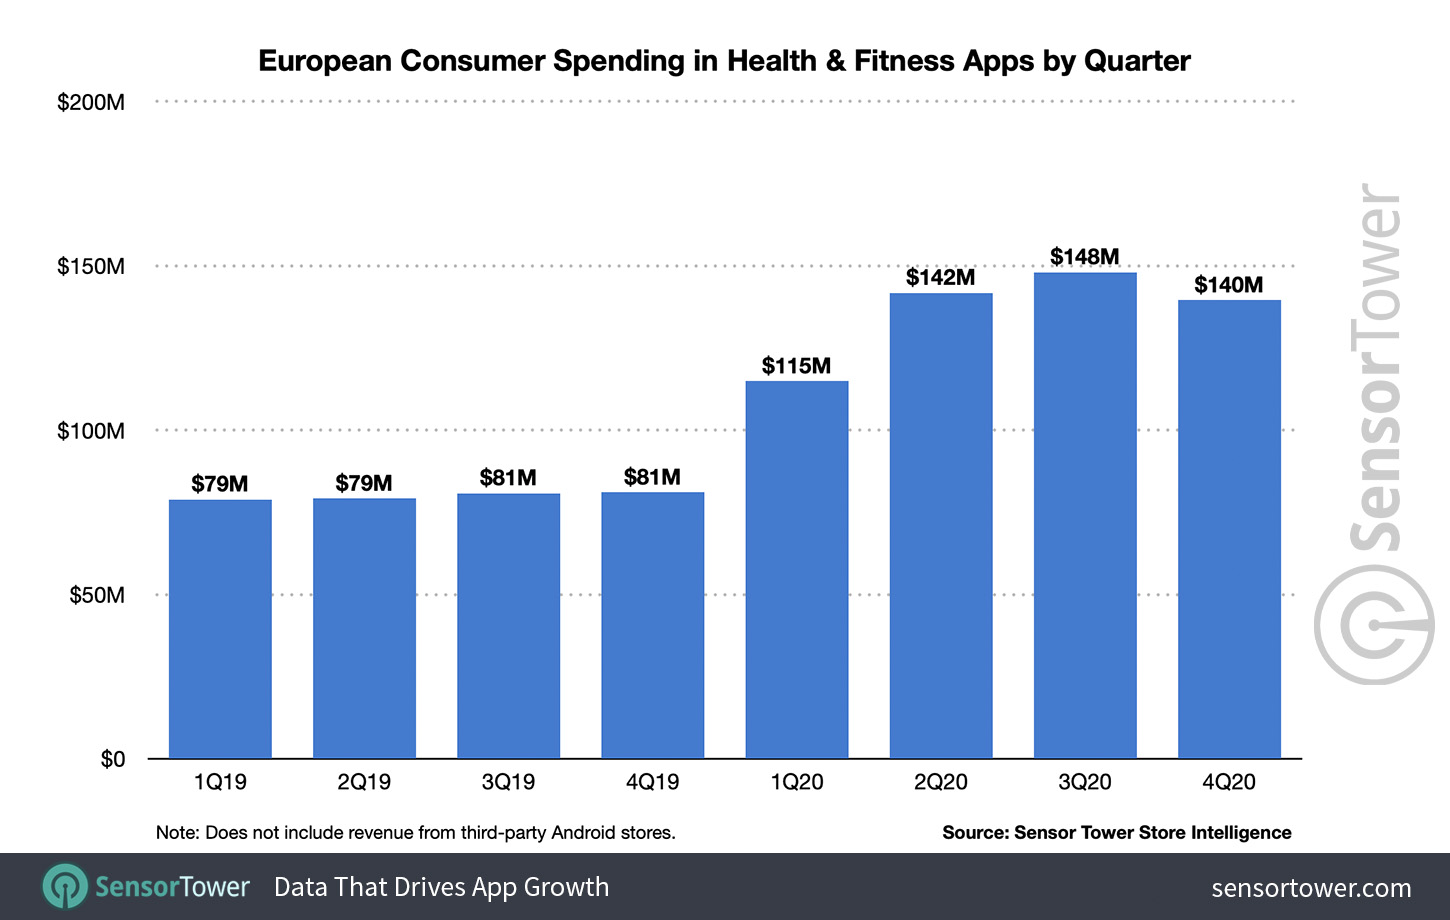 Top Health & Fitness Category Apps in Europe for March 2020 by